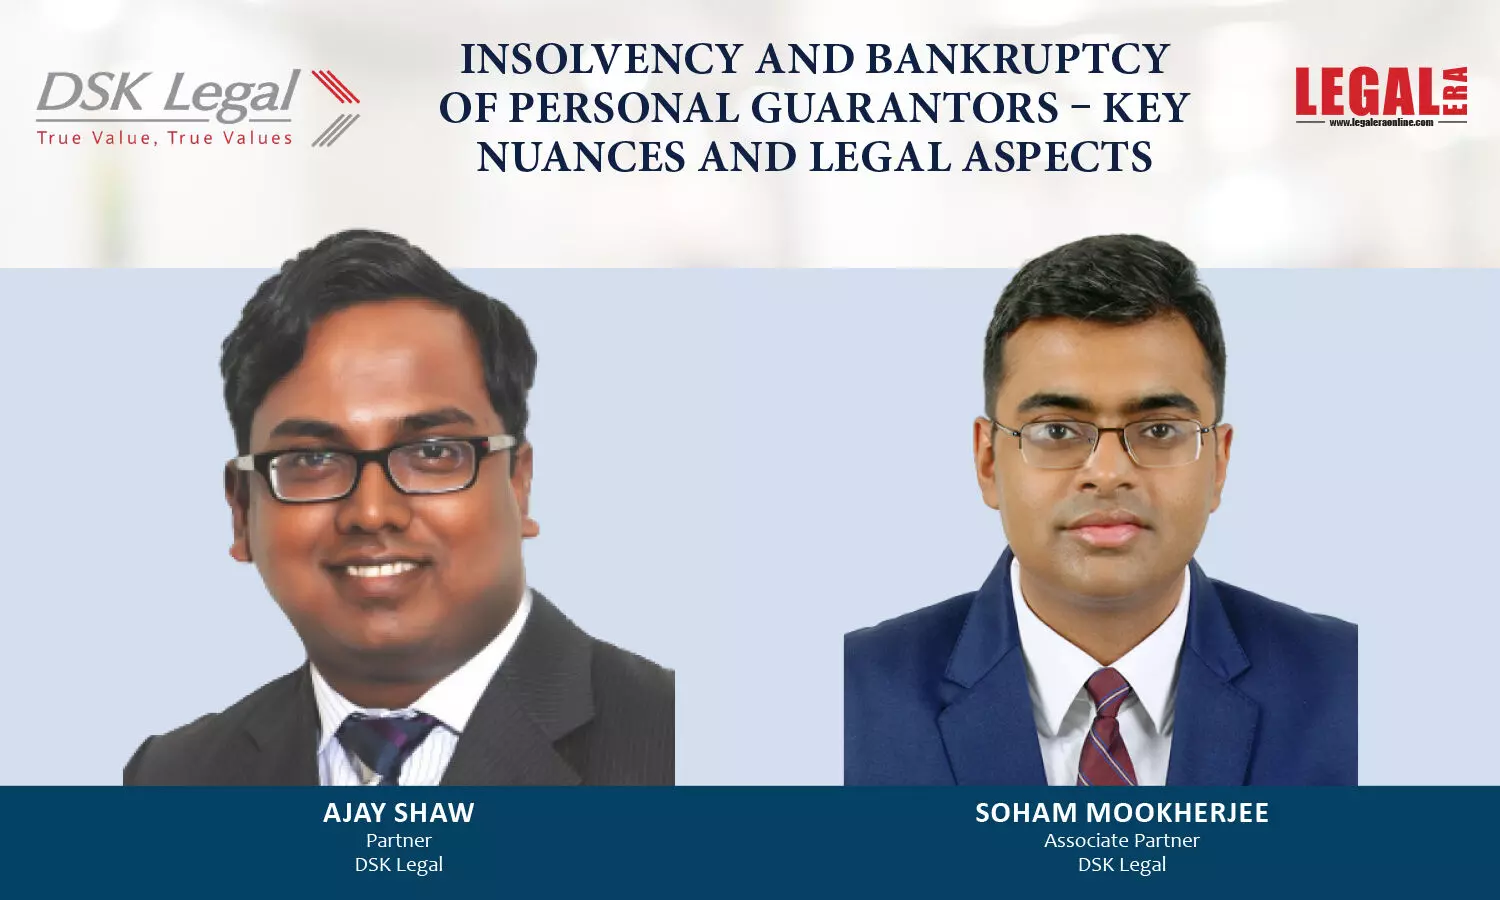 Insolvency And Bankruptcy Of Personal Guarantors - Key Nuances and Legal Aspects